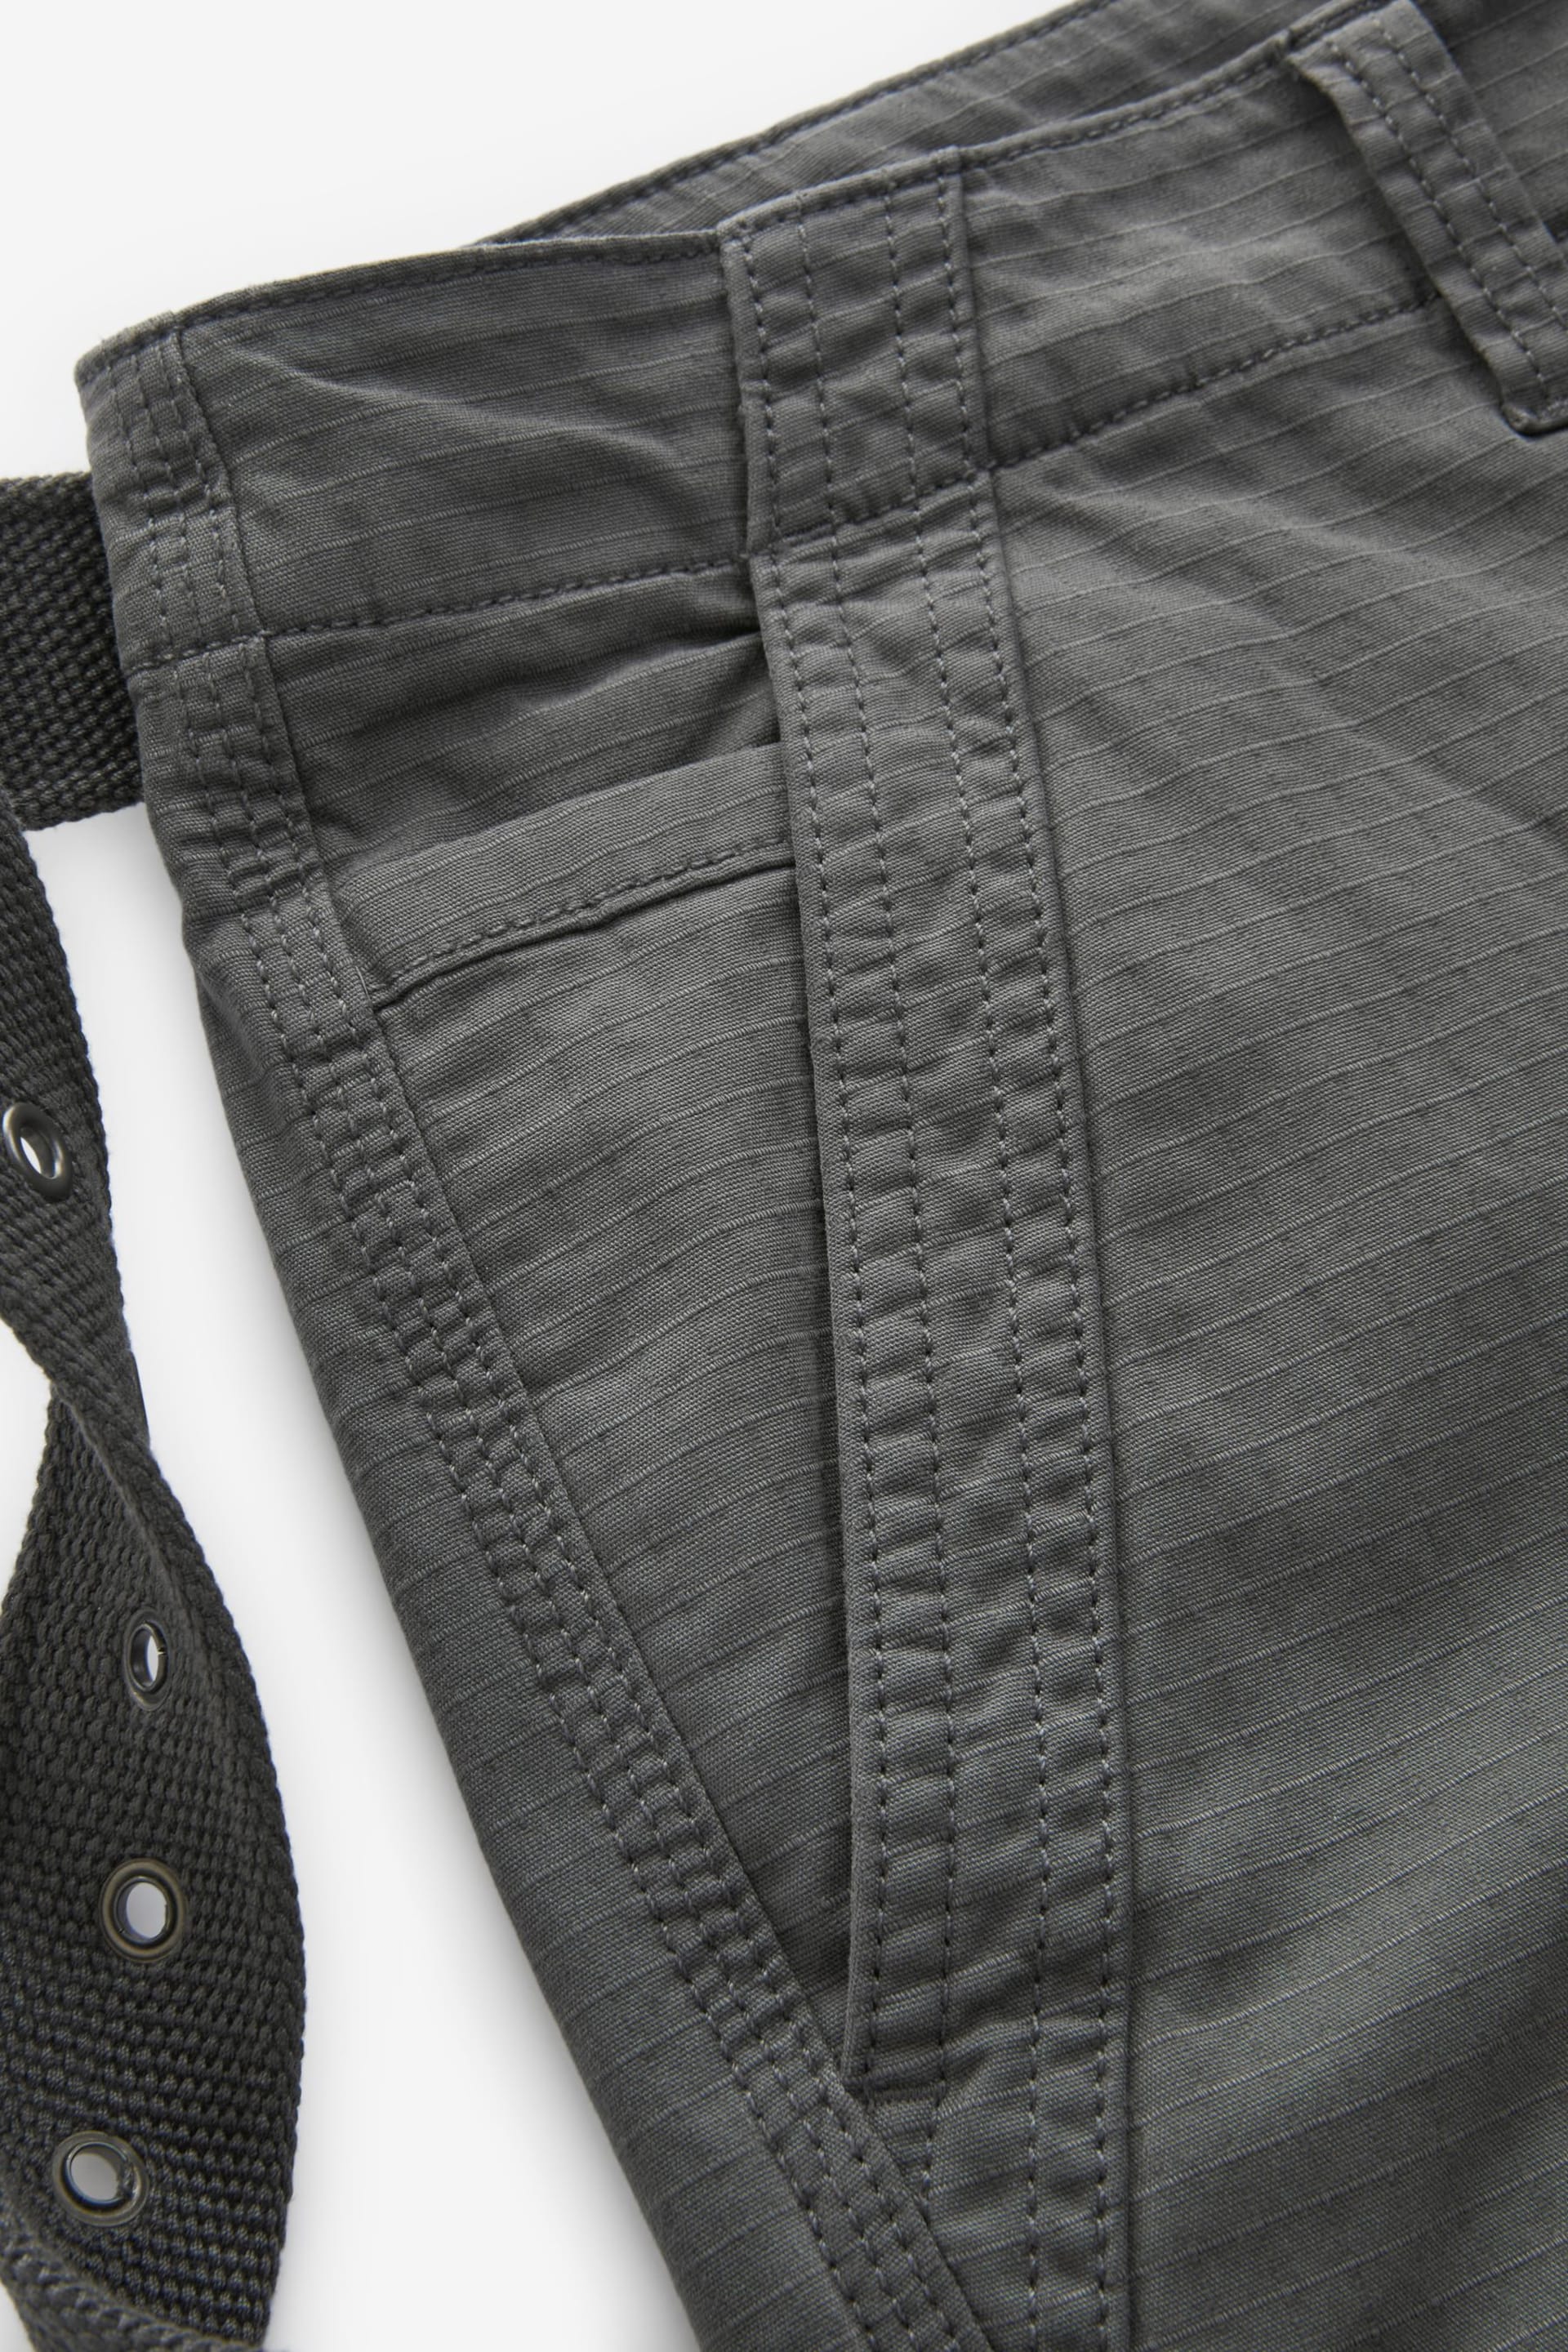 Charcoal Grey Belted Cargo Shorts - Image 9 of 12